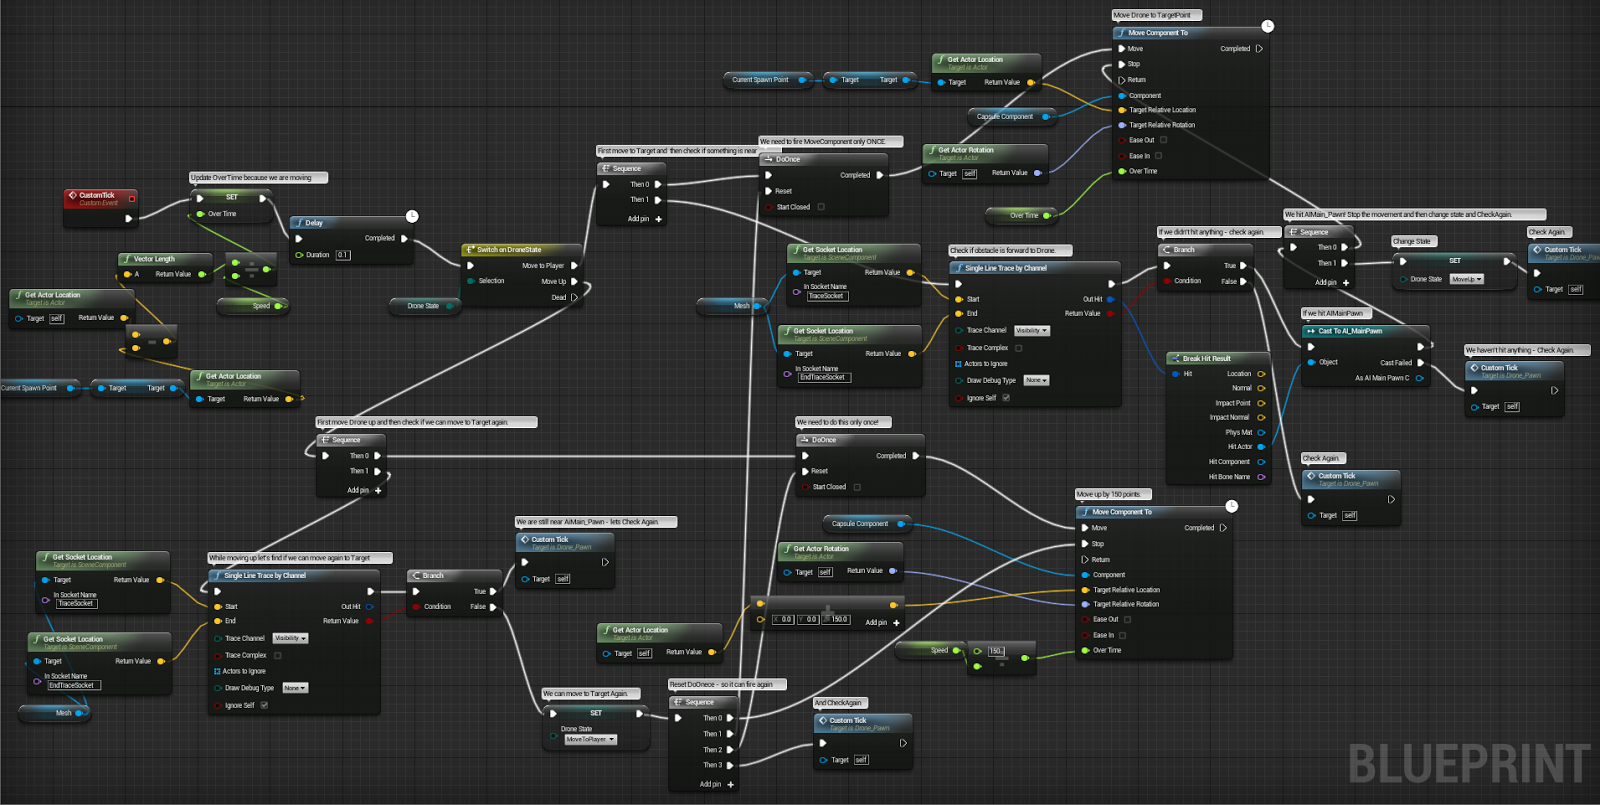 Unreal uses nodes for game logic